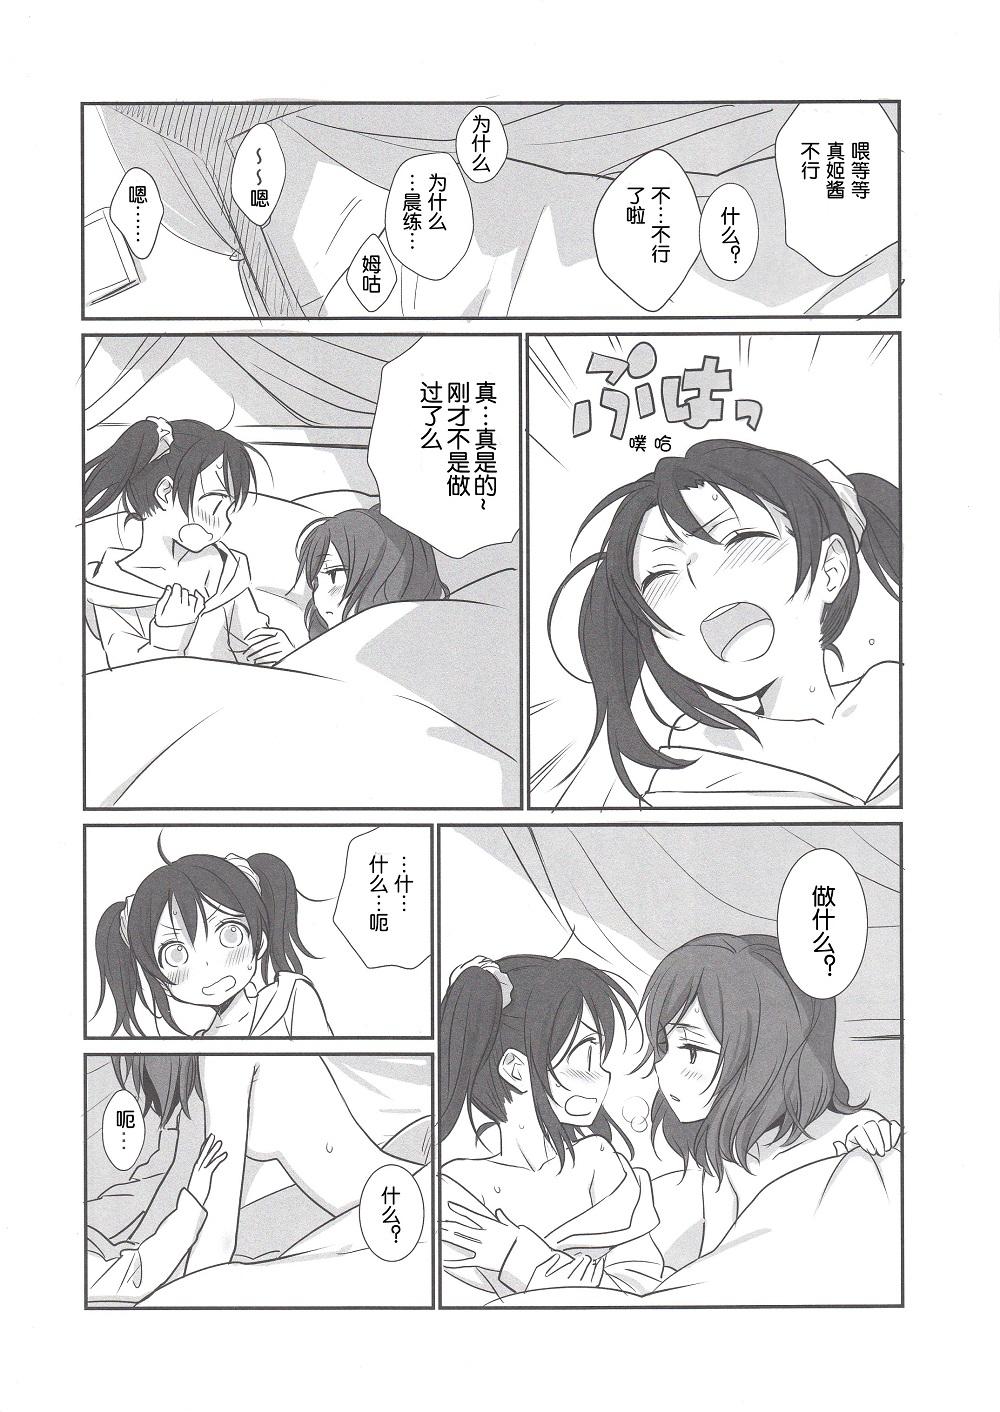 Lovers NicoMaki Instant Ecchi - Love live 18 Year Old - Page 3